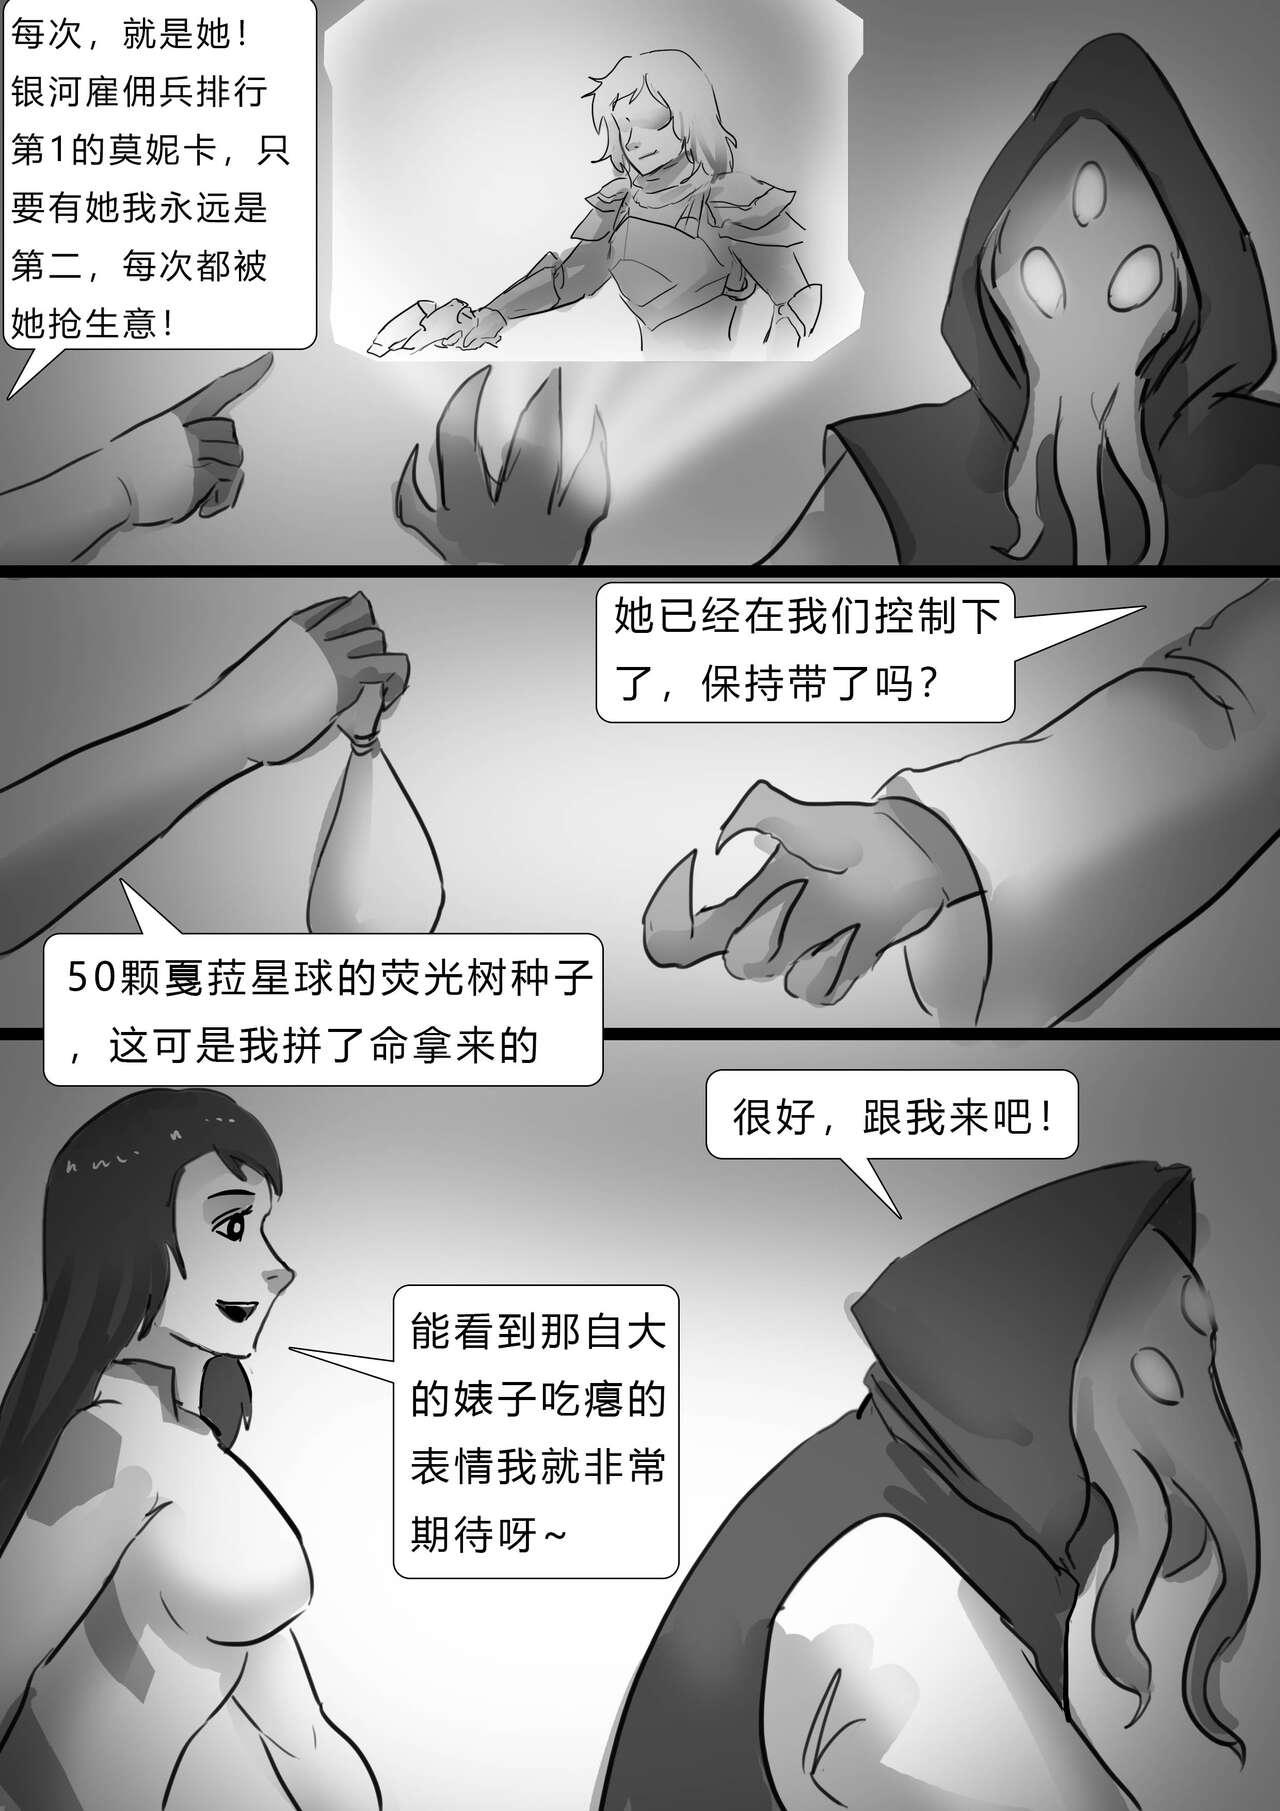 Style 千变女奴 Thousand-change slave girl Audition - Page 4